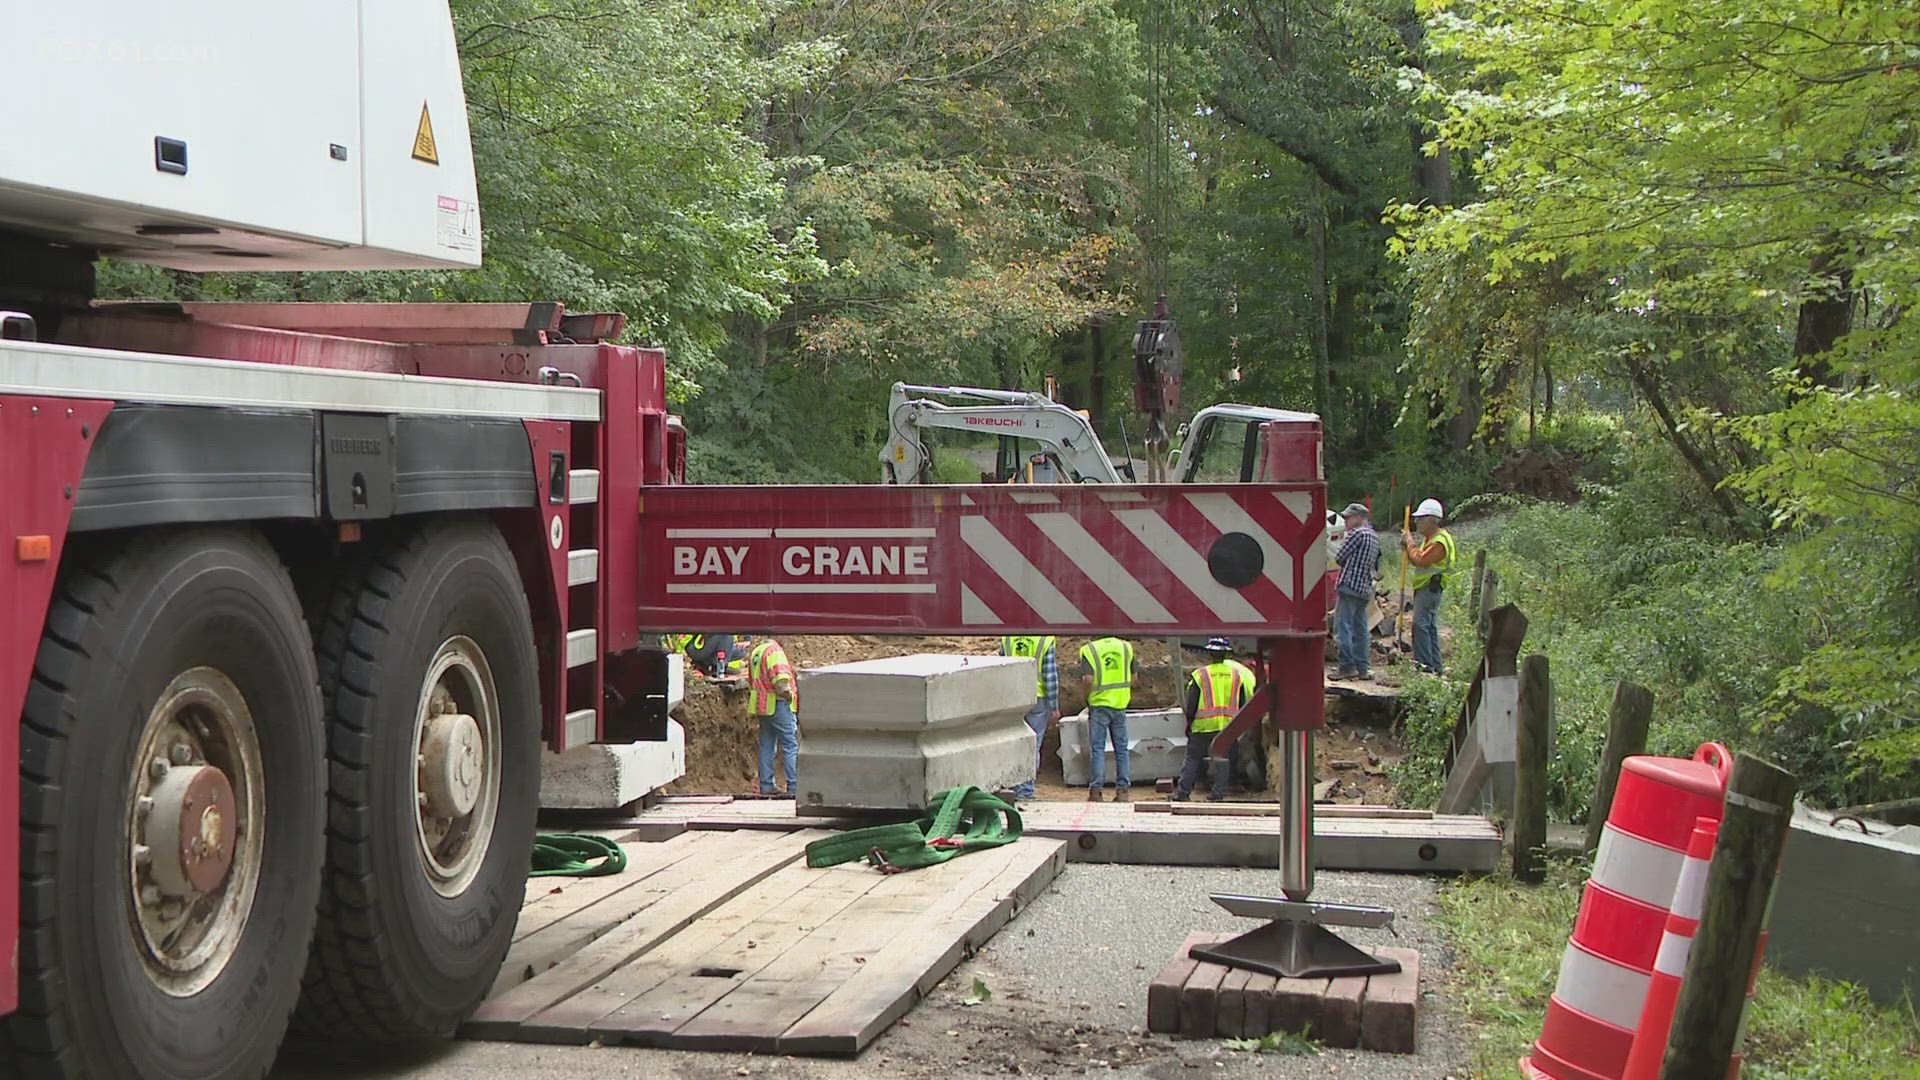 Crews worked to install a temporary ramp on Tuesday that is set to open Wednesday after two bridges on Brook Road washed away during heavy rain and winds.